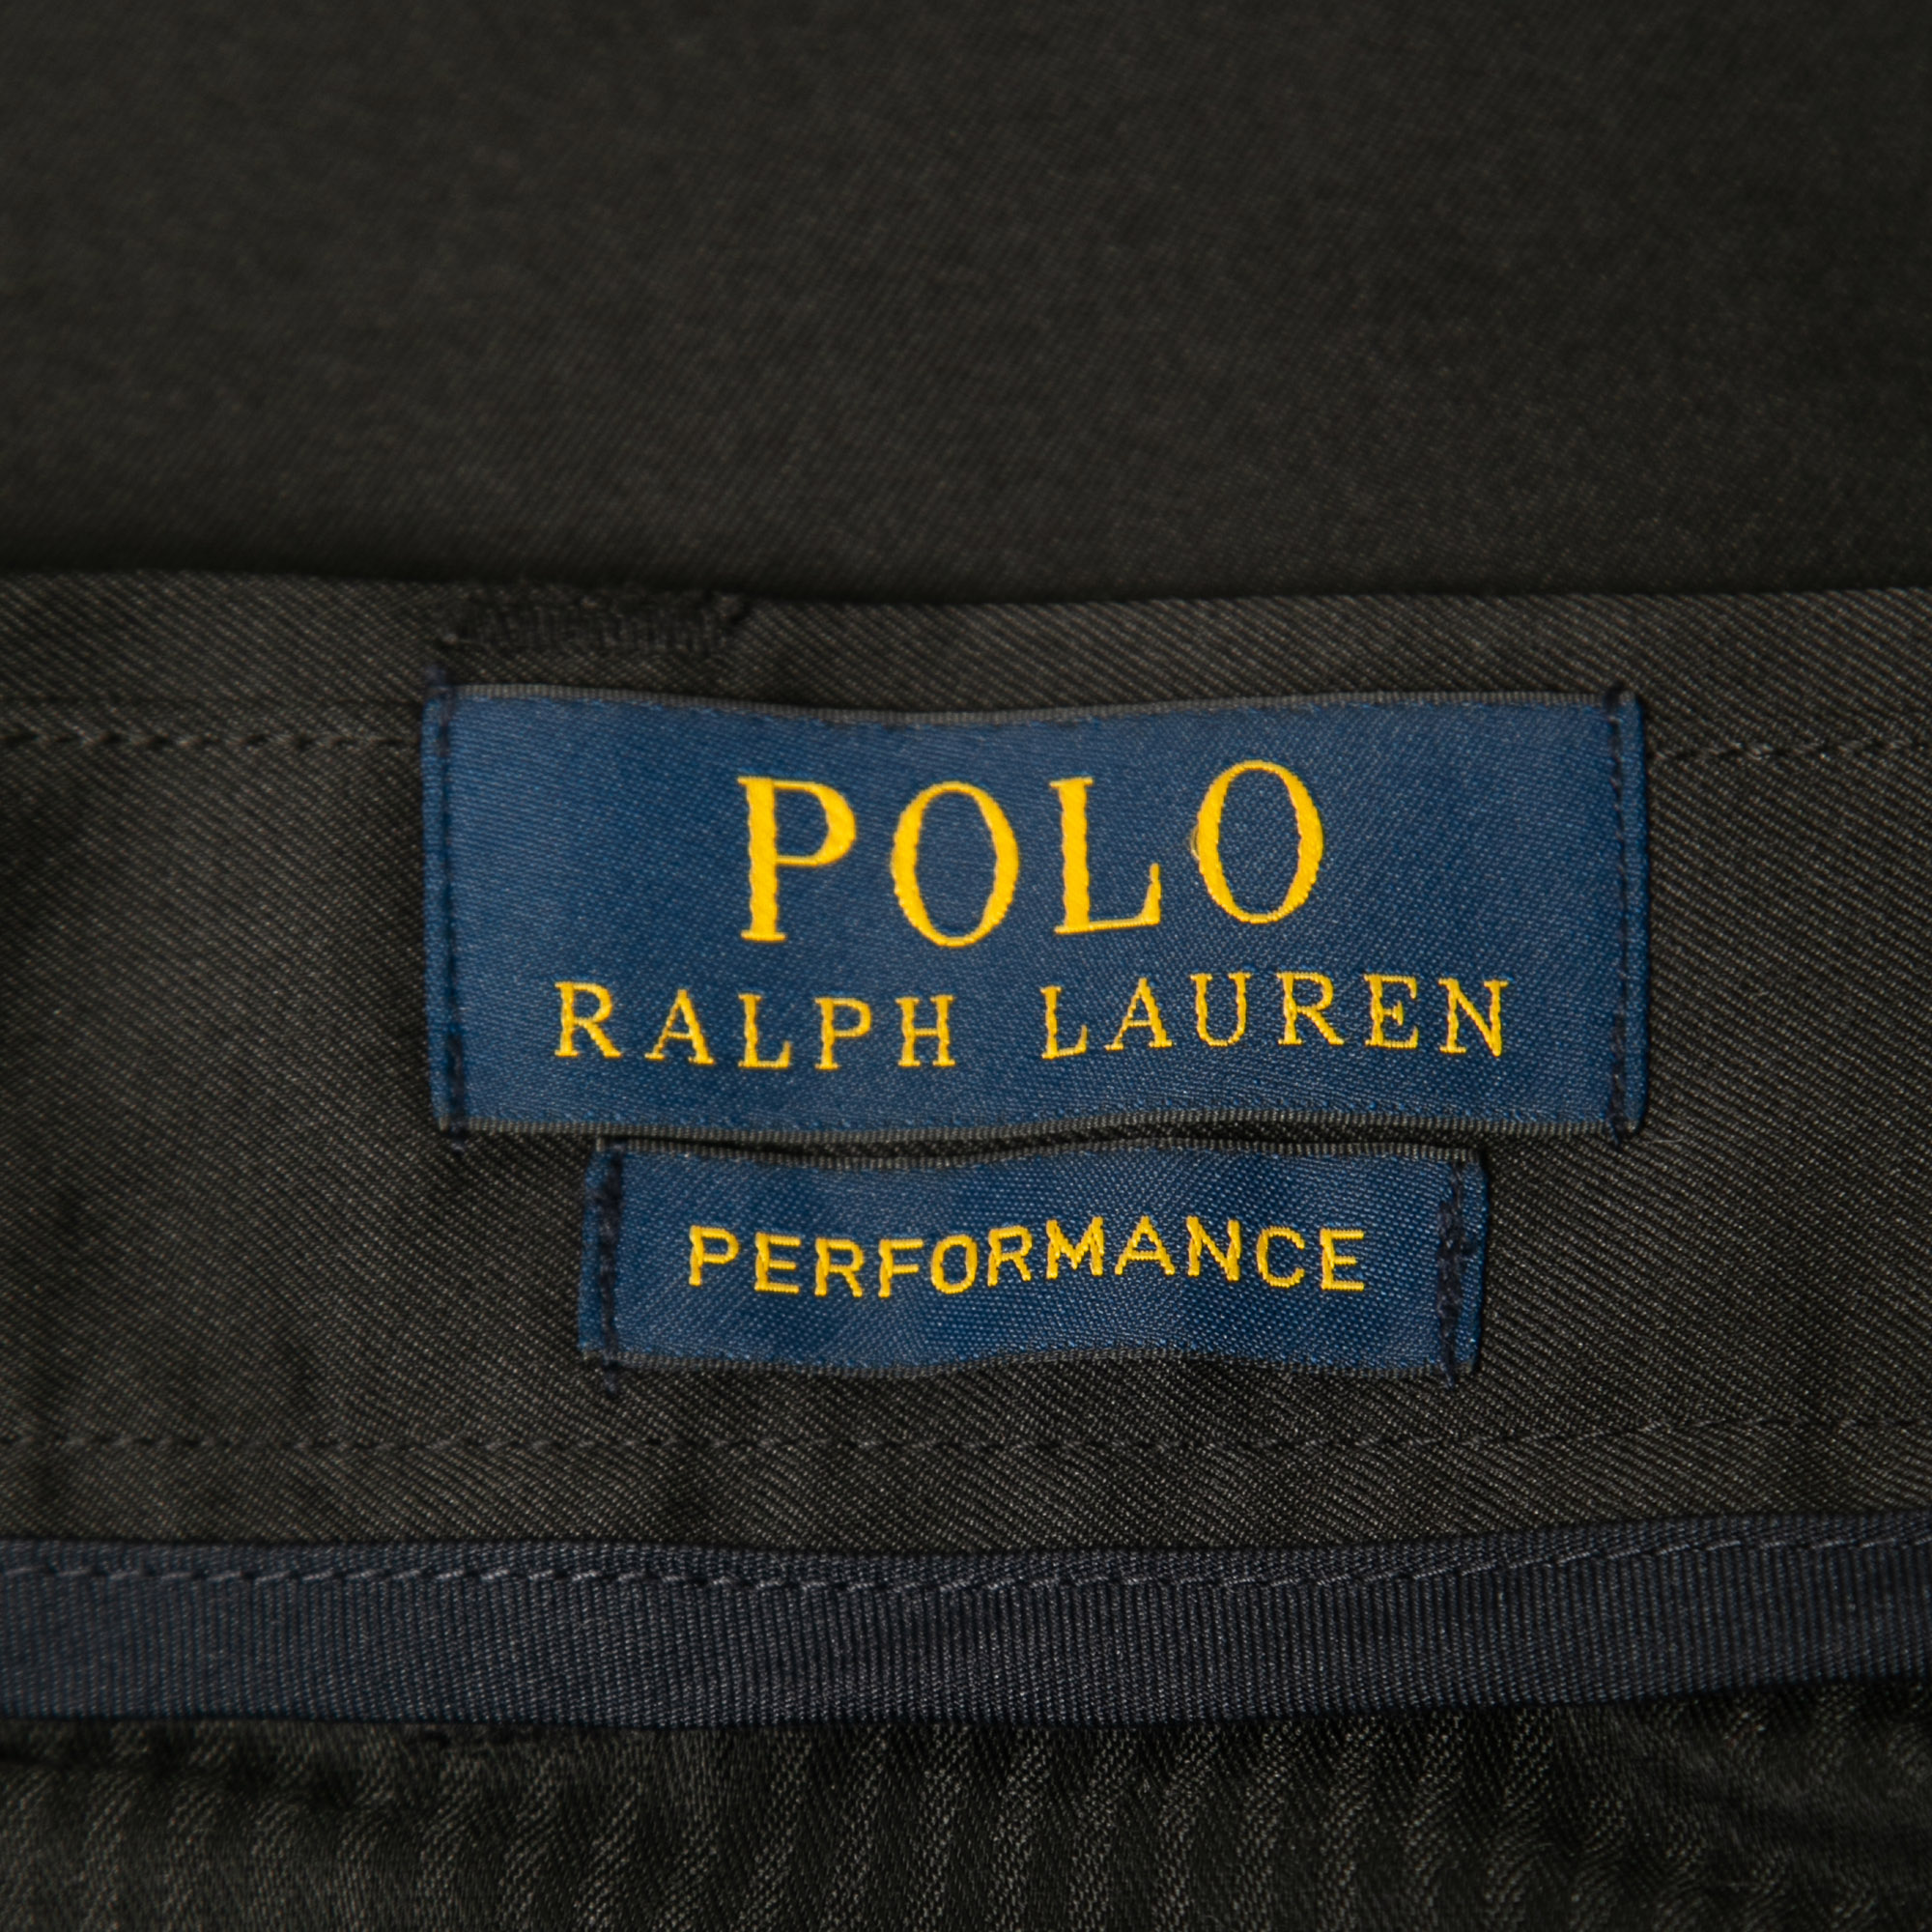 Polo Ralph Lauren Black Synthetic Stretch Classic Fit Shorts M